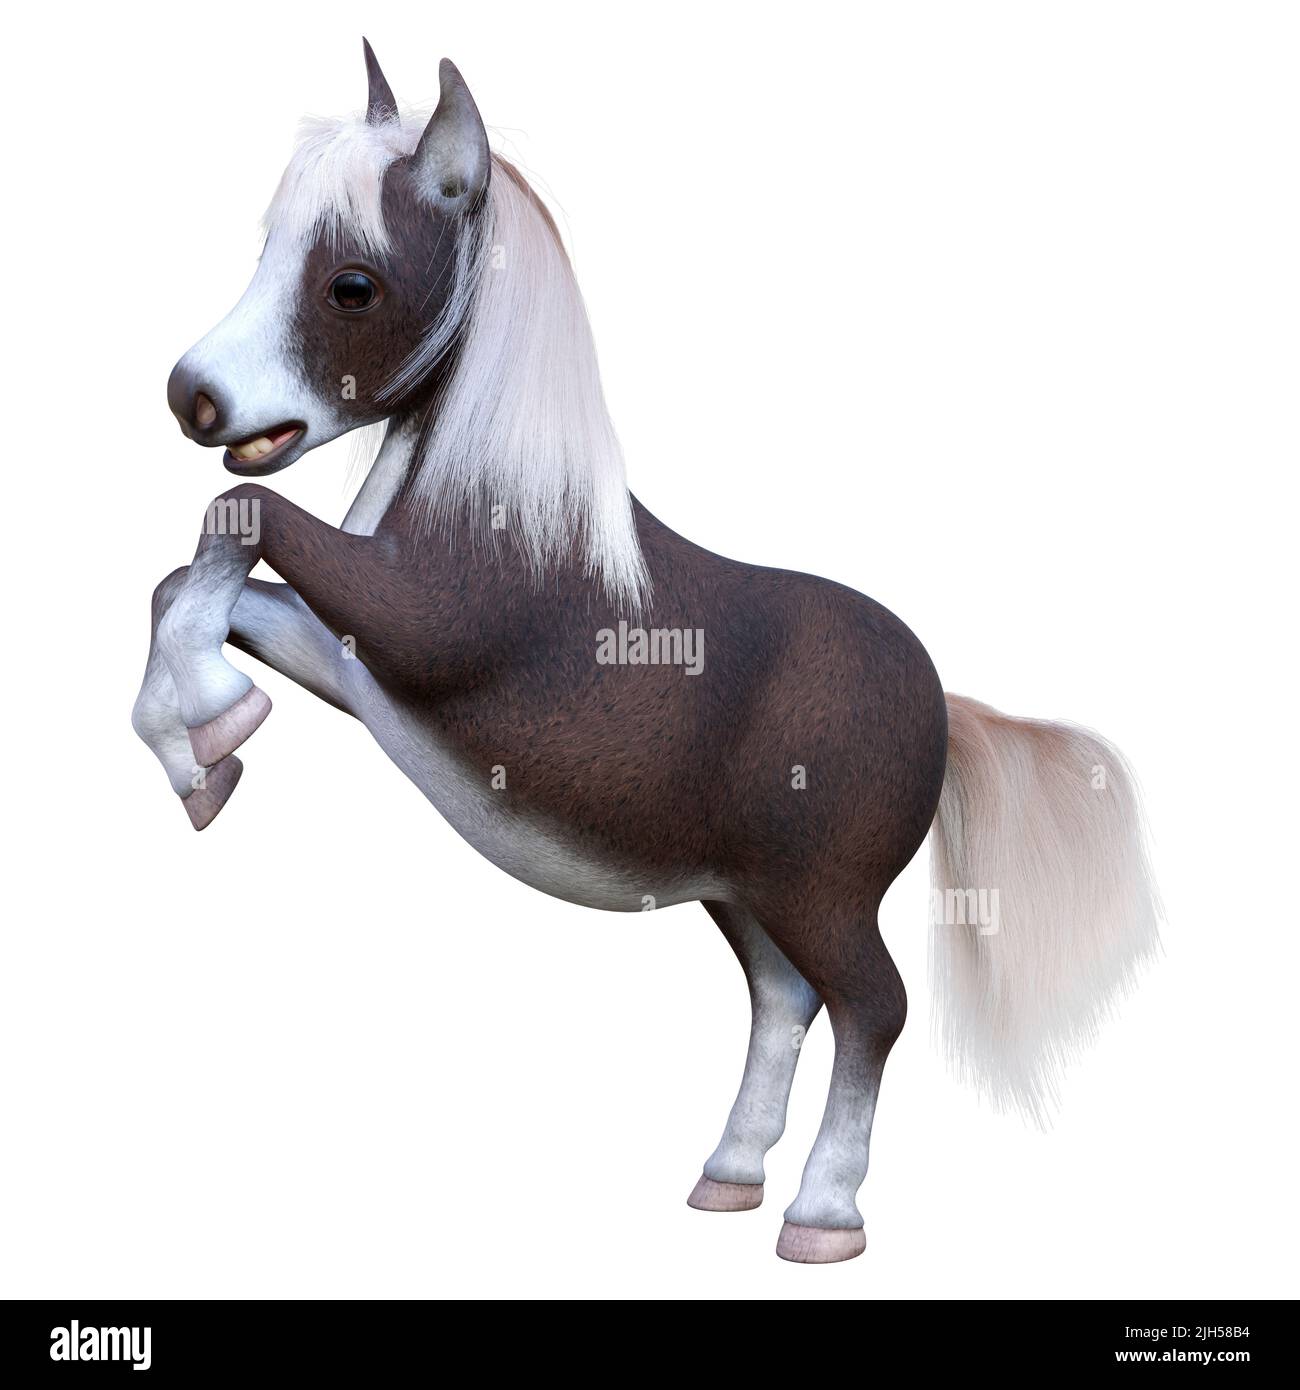 3D rendering of a pony or a small horse or Equus ferus caballus isolated on white background Stock Photo